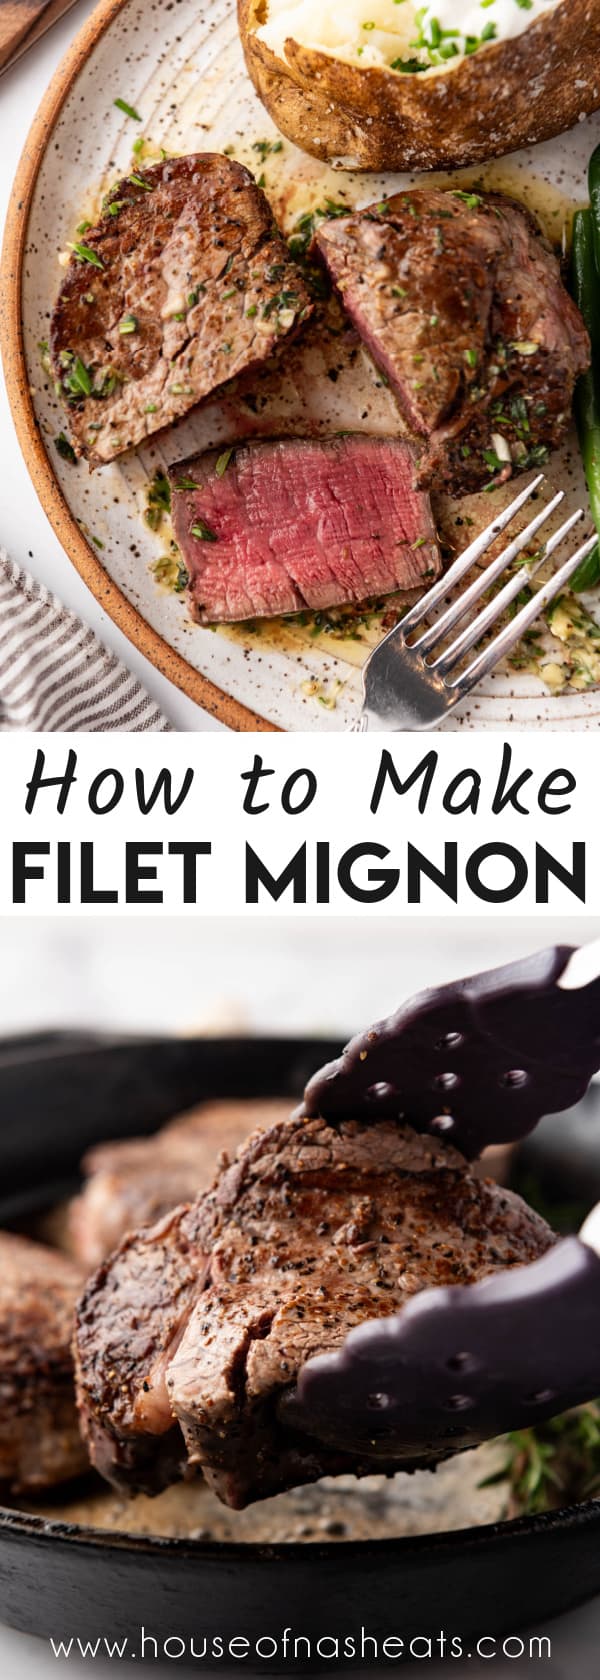 A collage of images of filet mignon with text overlay.